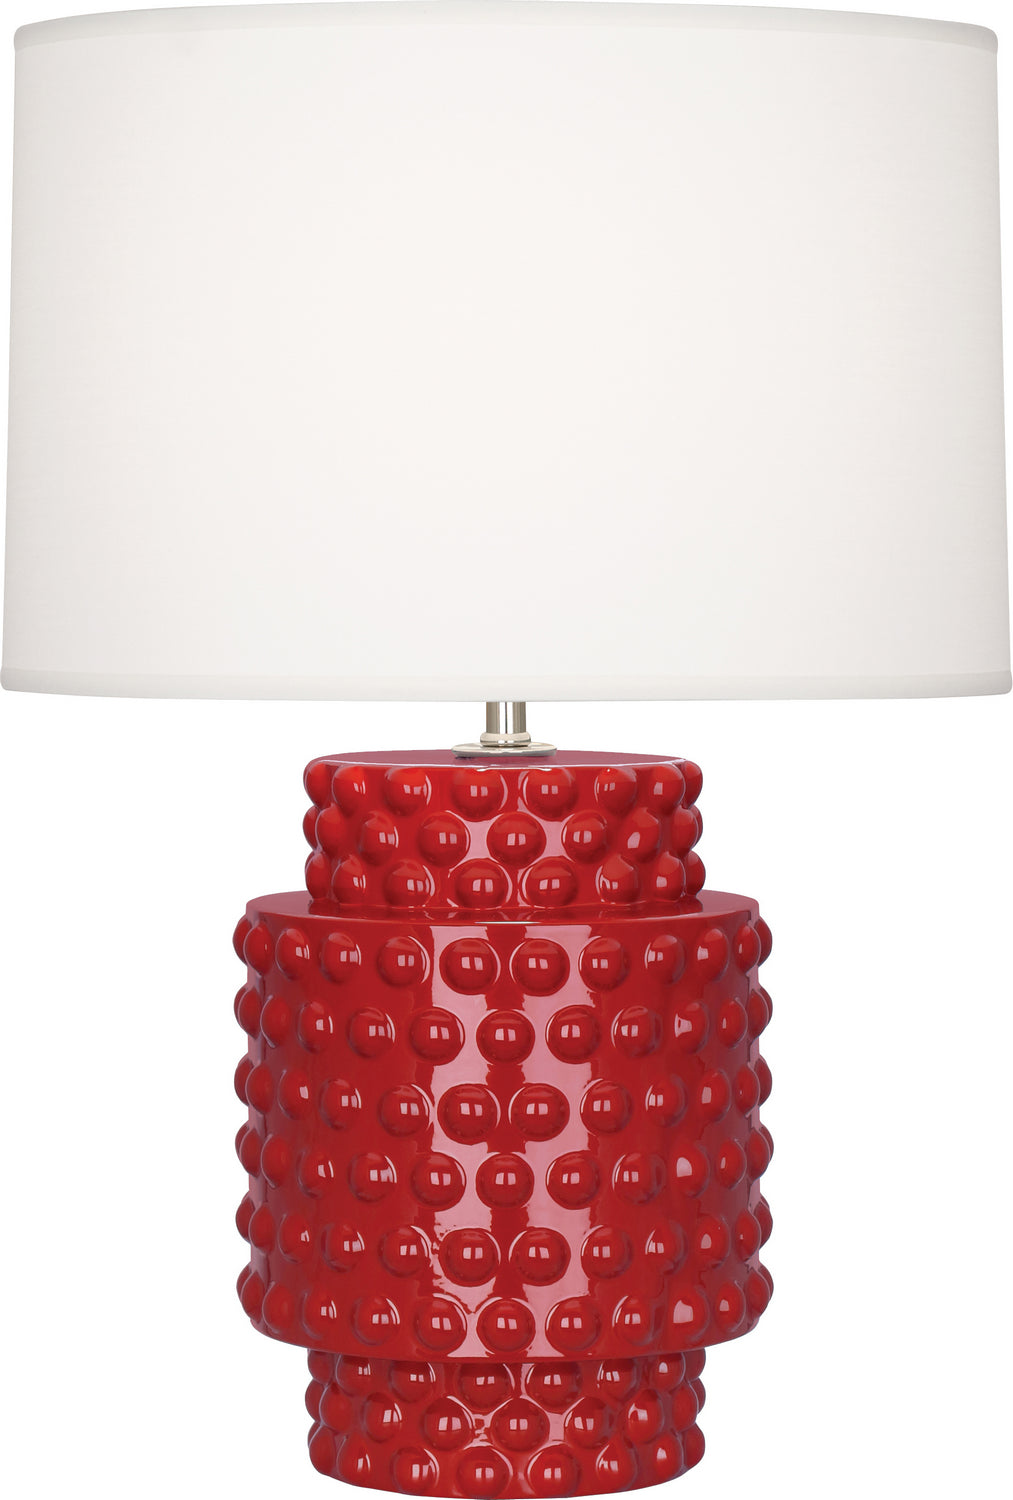 Robert Abbey - One Light Accent Lamp - Dolly - Ruby Red Glazed Textured Ceramic- Union Lighting Luminaires Decor